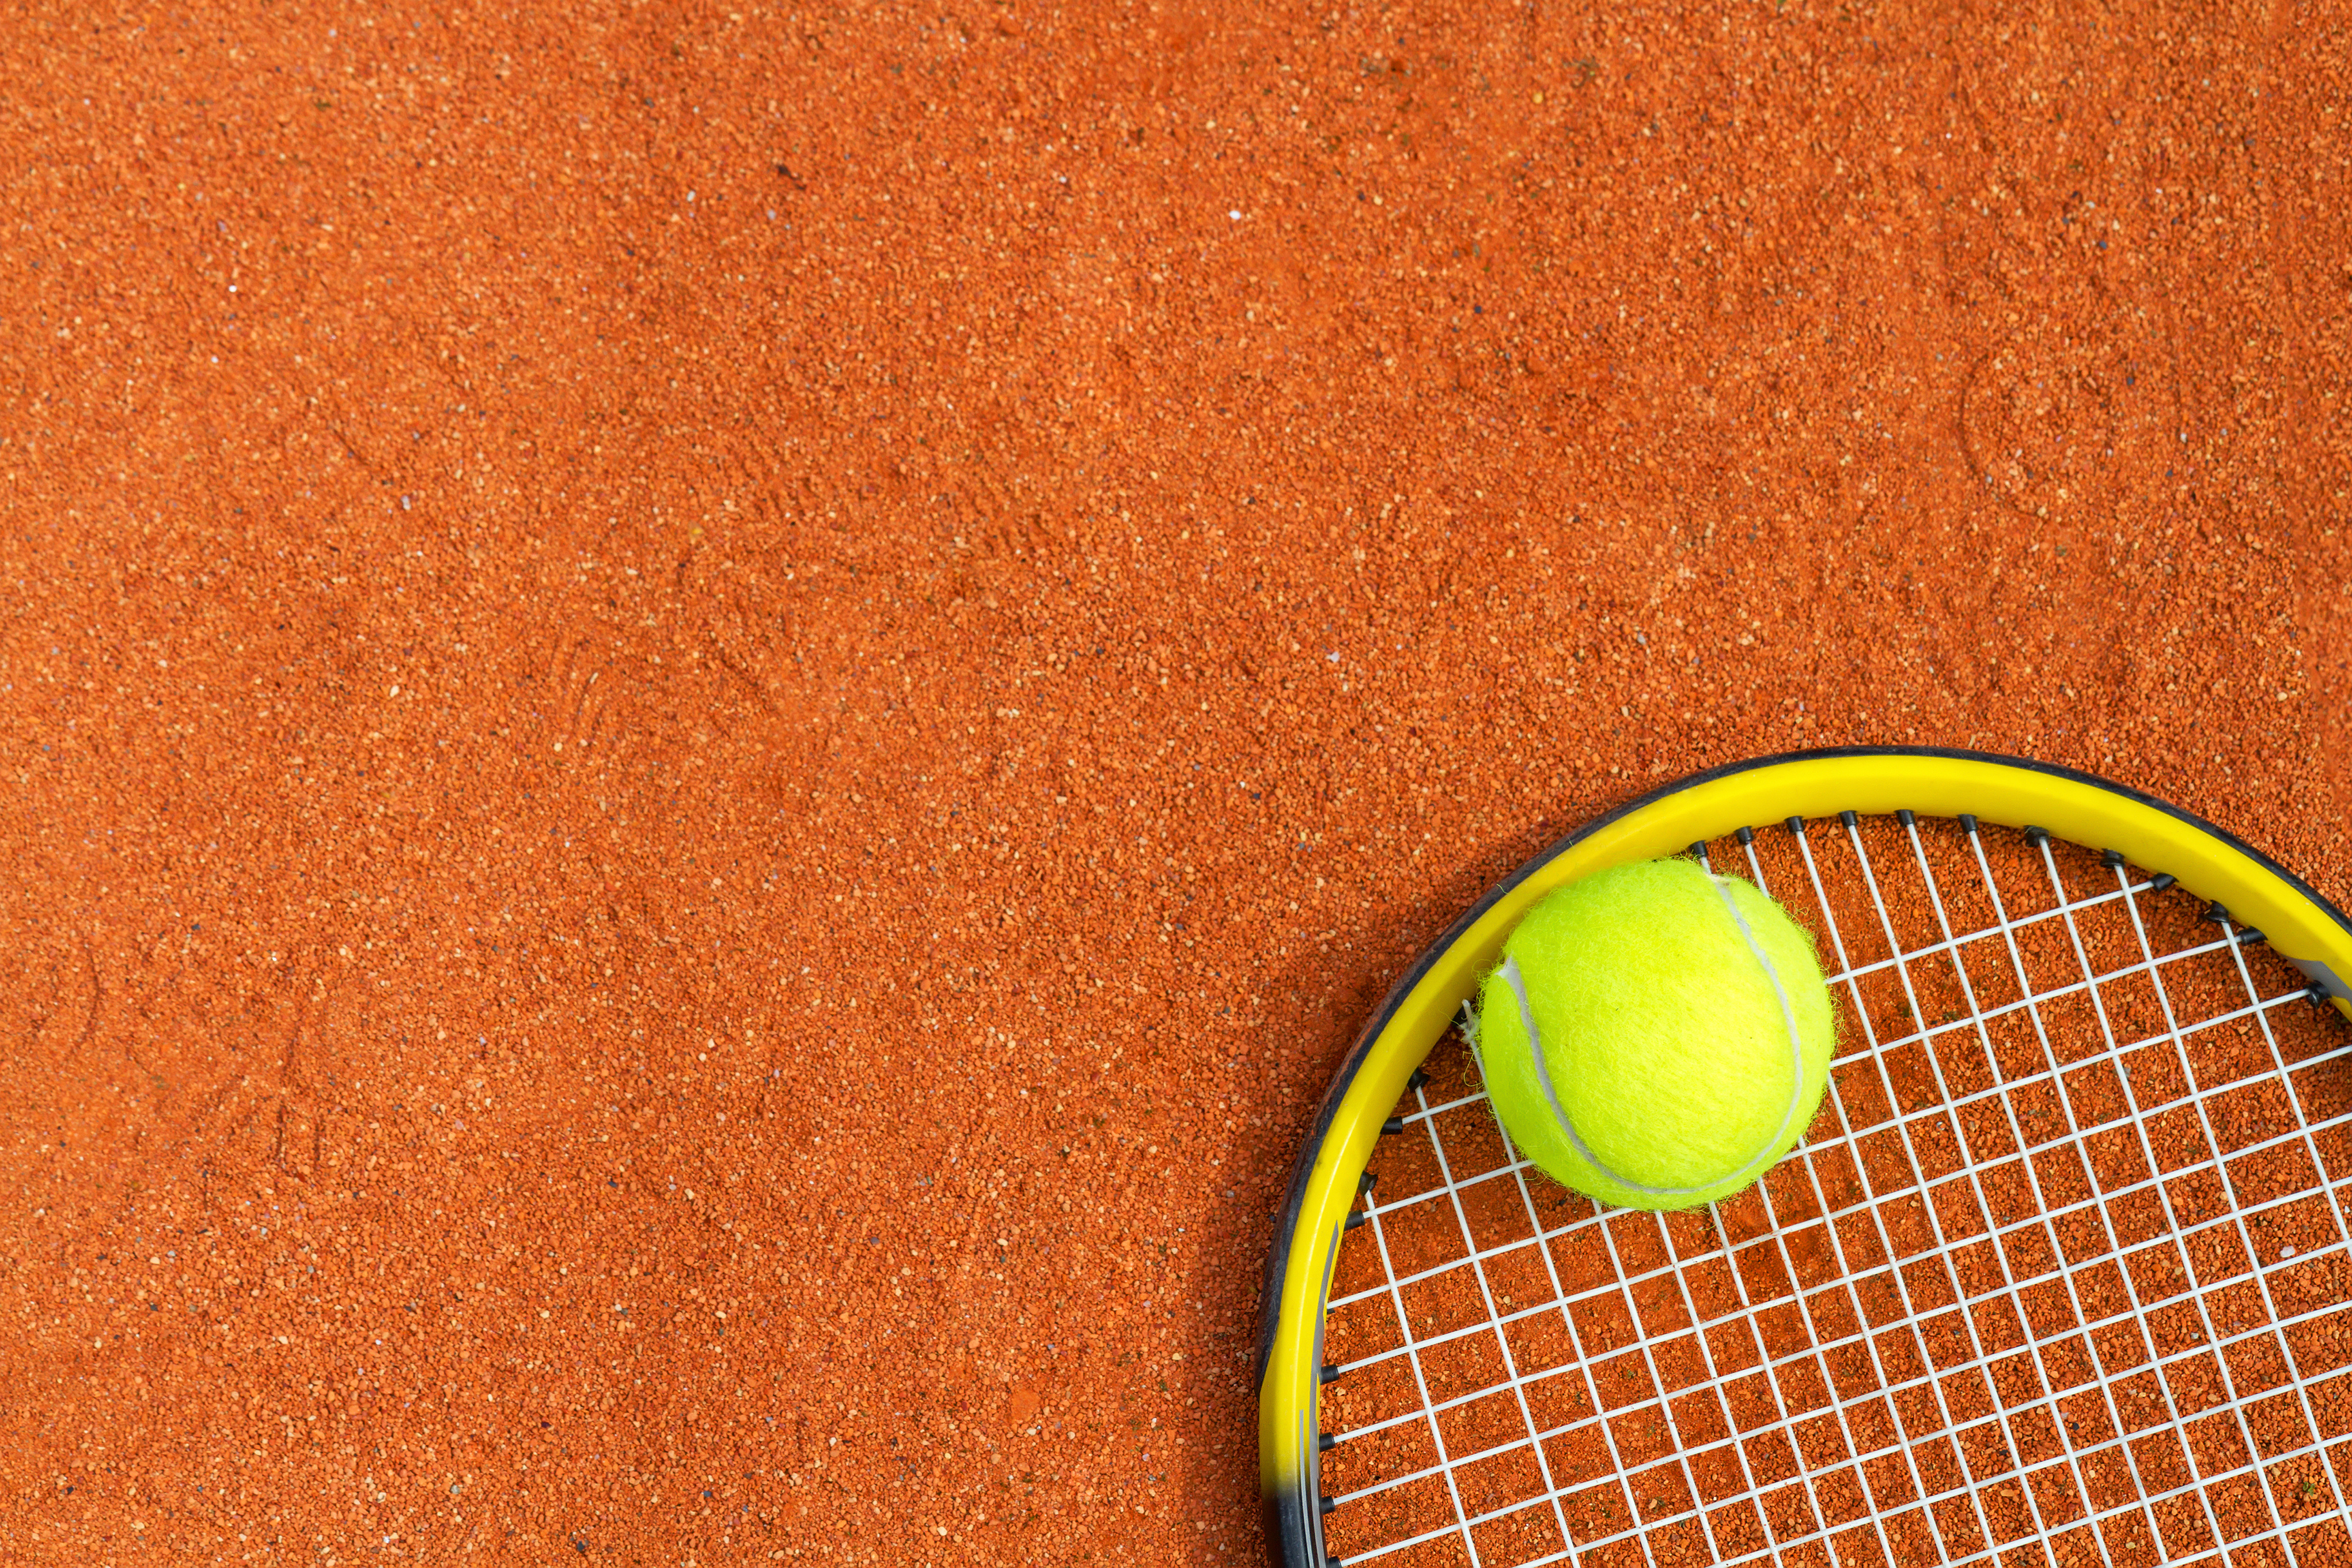 tennis equipment on a brown surface